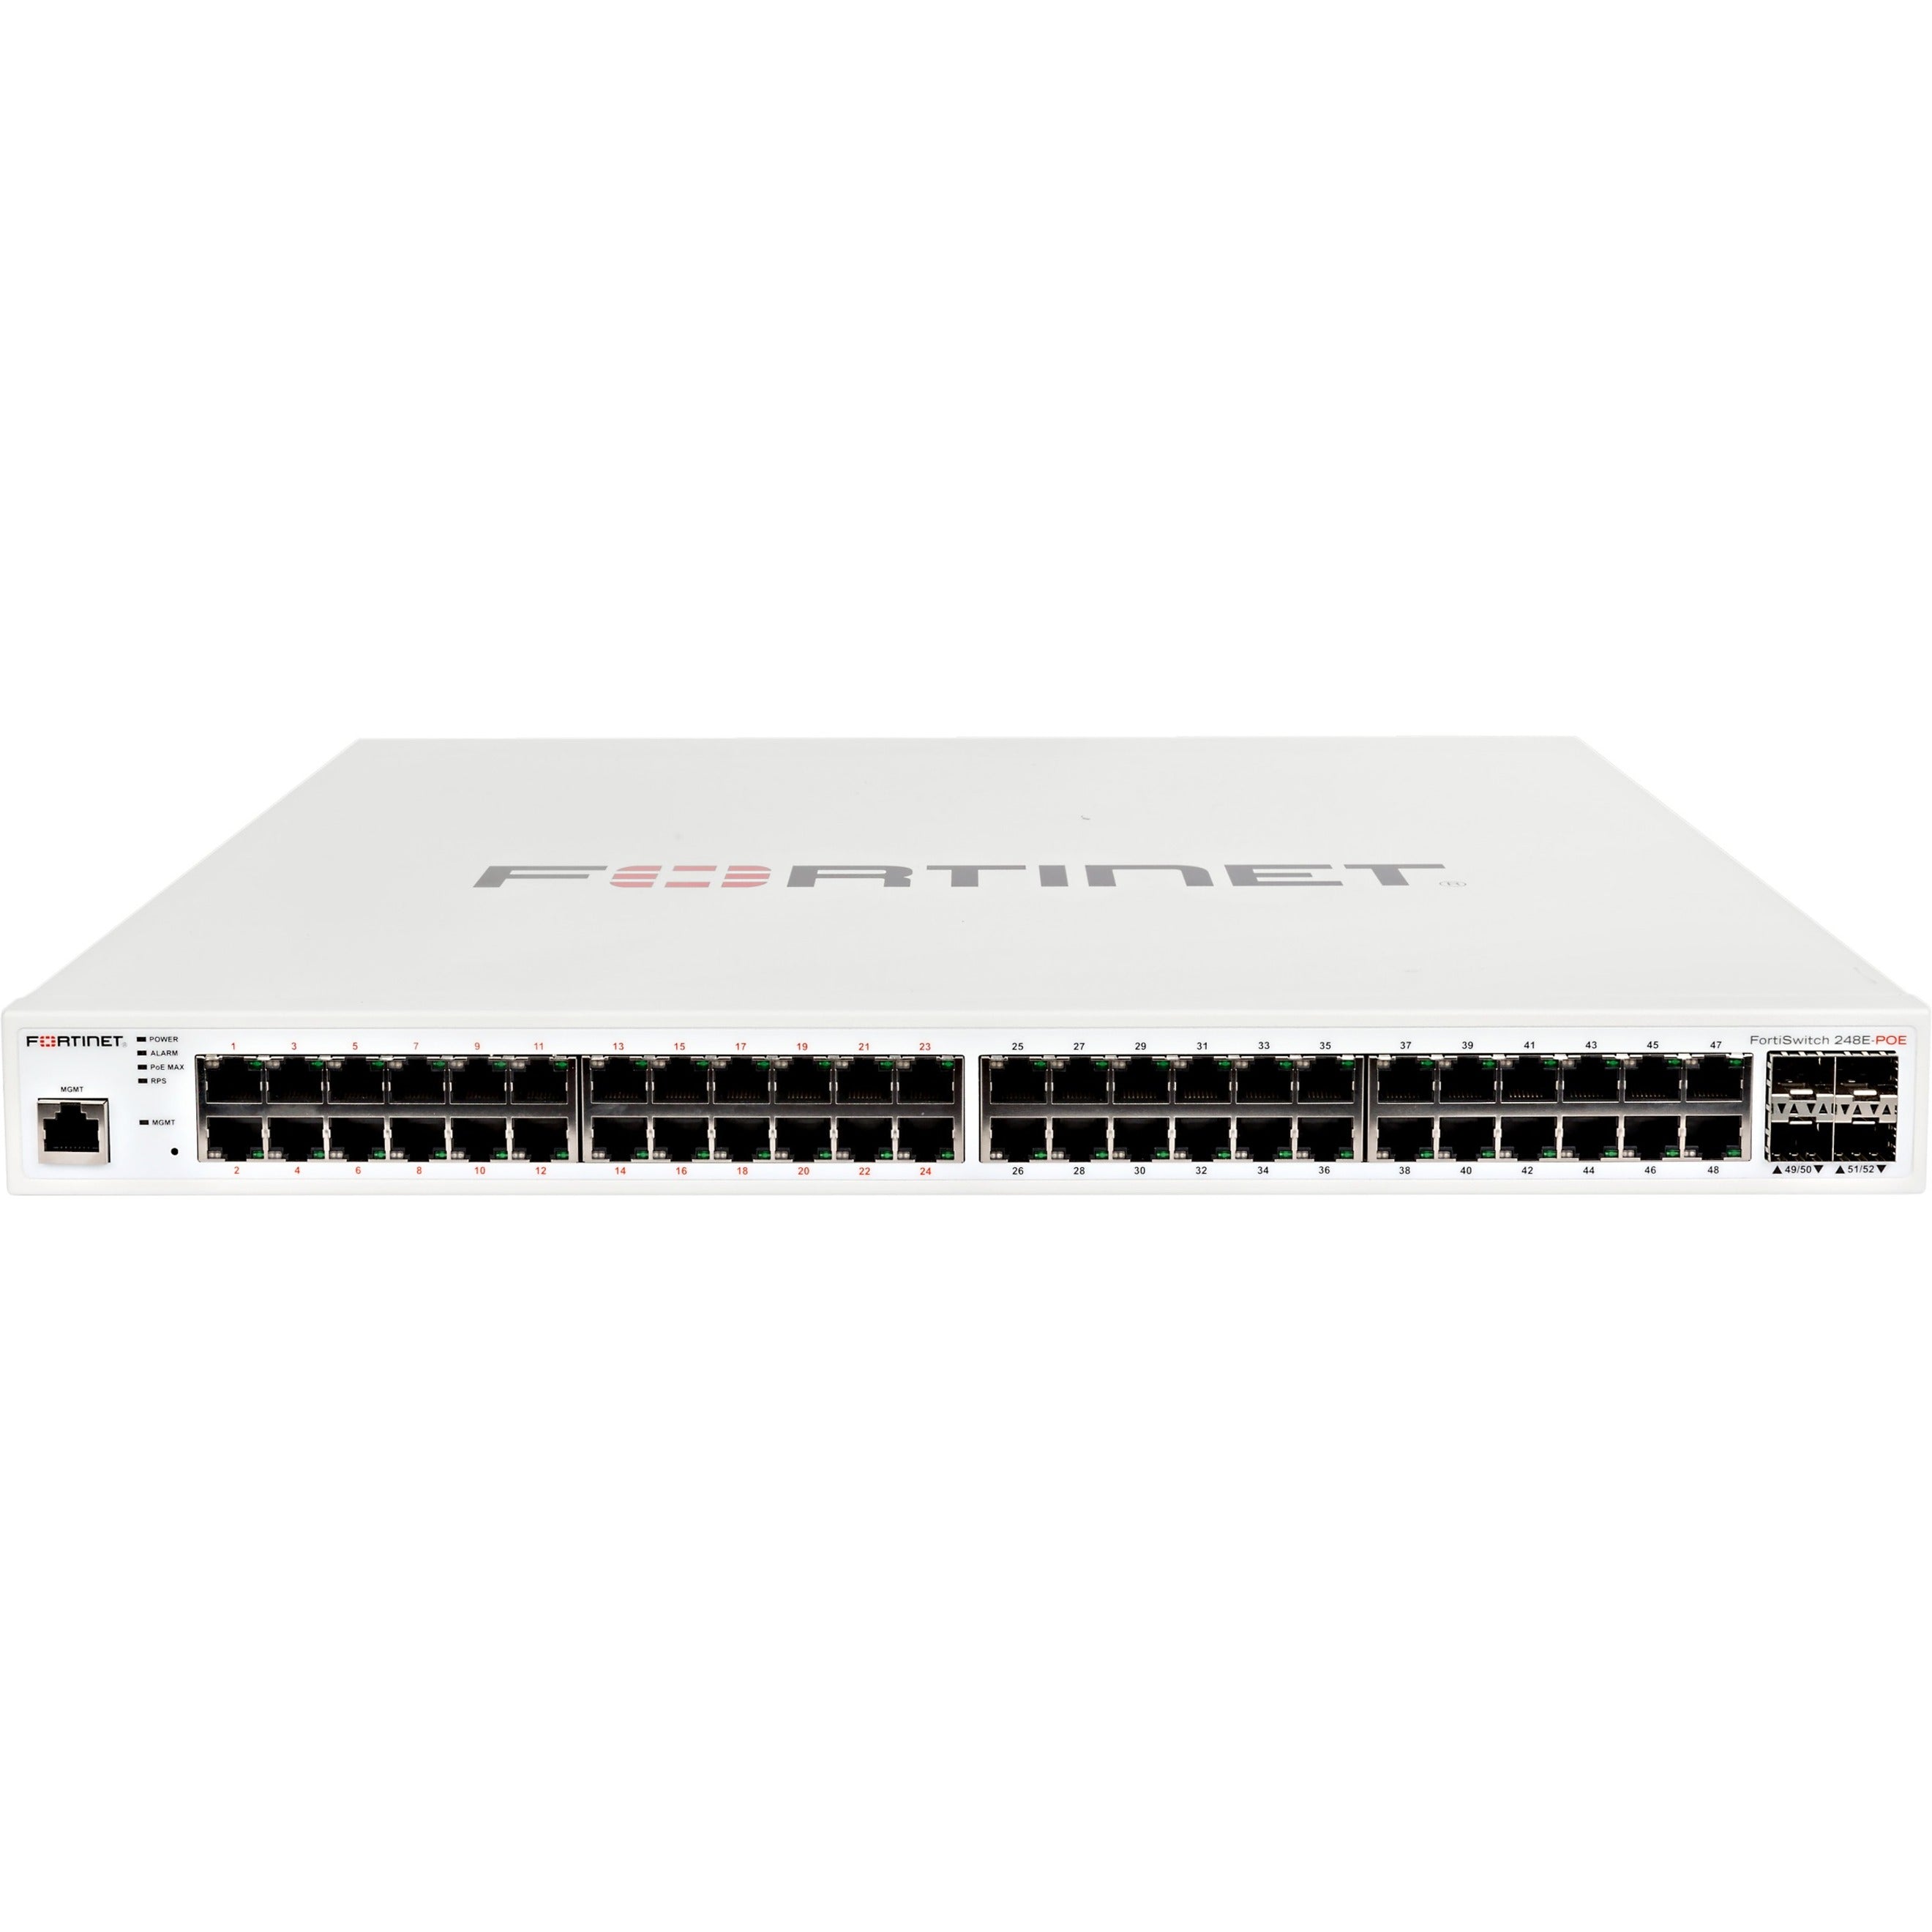 Fortinet FS-248E-POE FortiSwitch Ethernet Switch, 48 Port Gigabit Ethernet with PoE